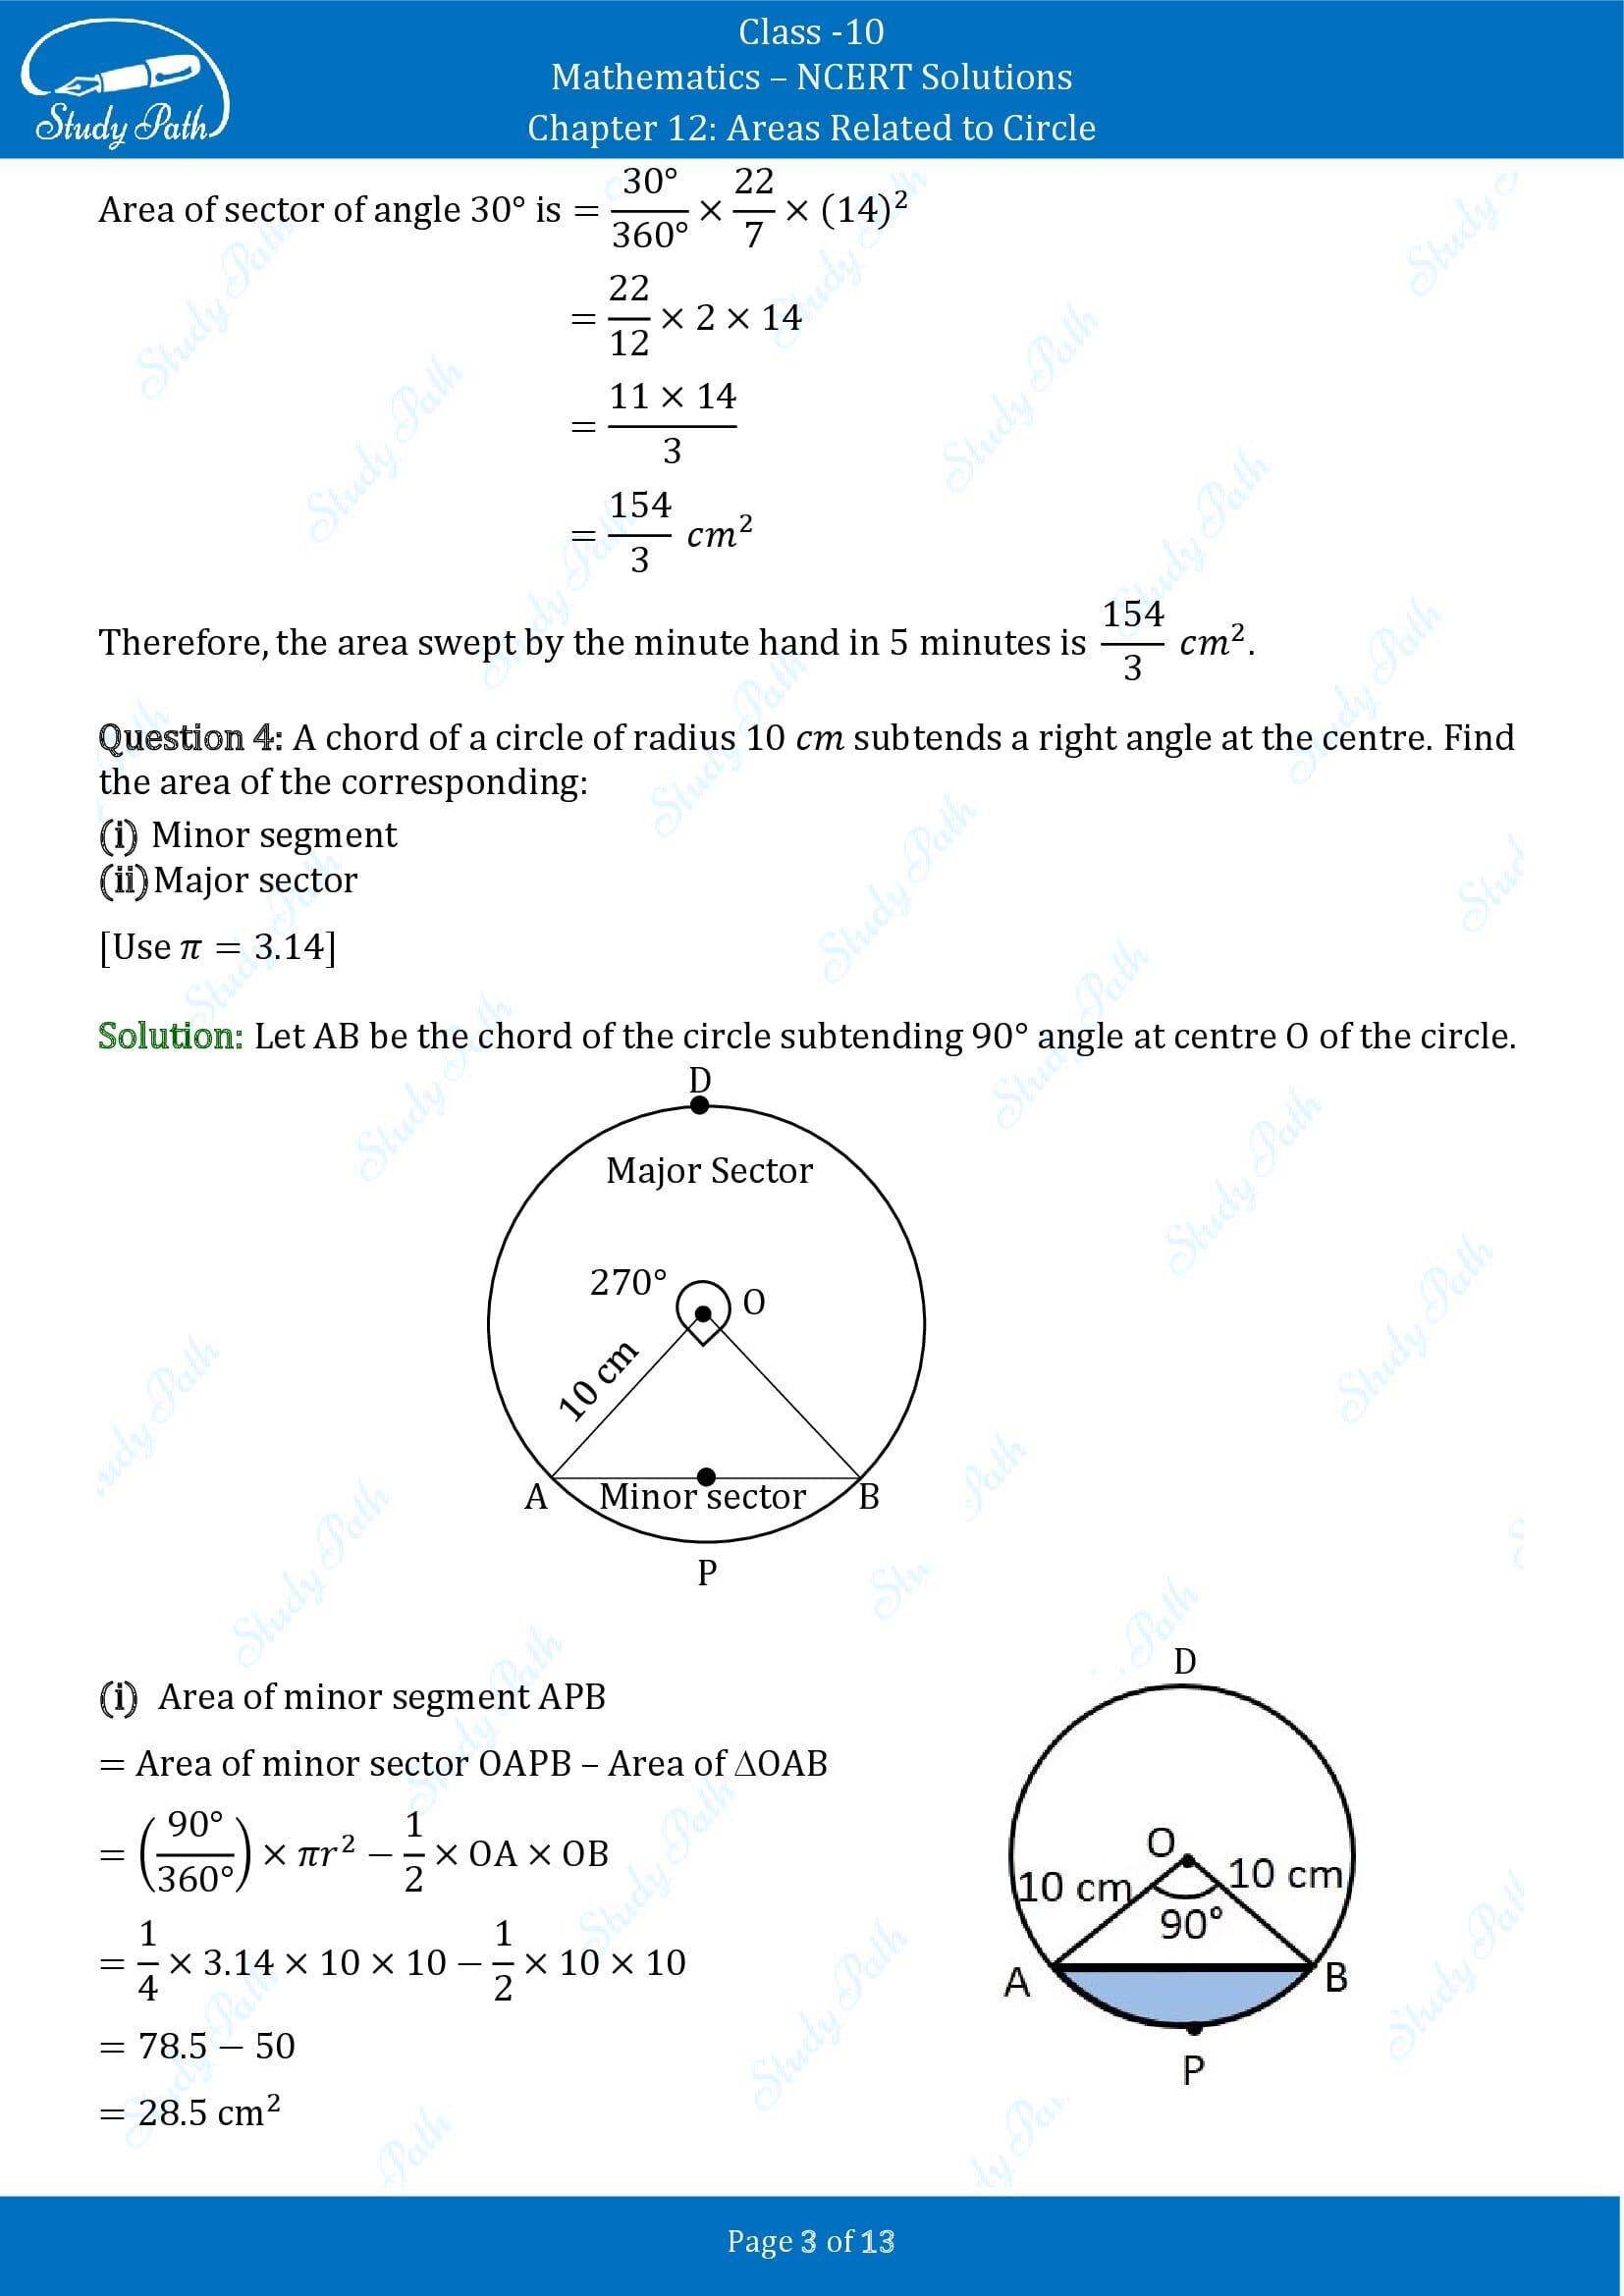 NCERT Solutions for Class 10 Maths Chapter 12 Areas Related to Circles Exercise 12.2 00003